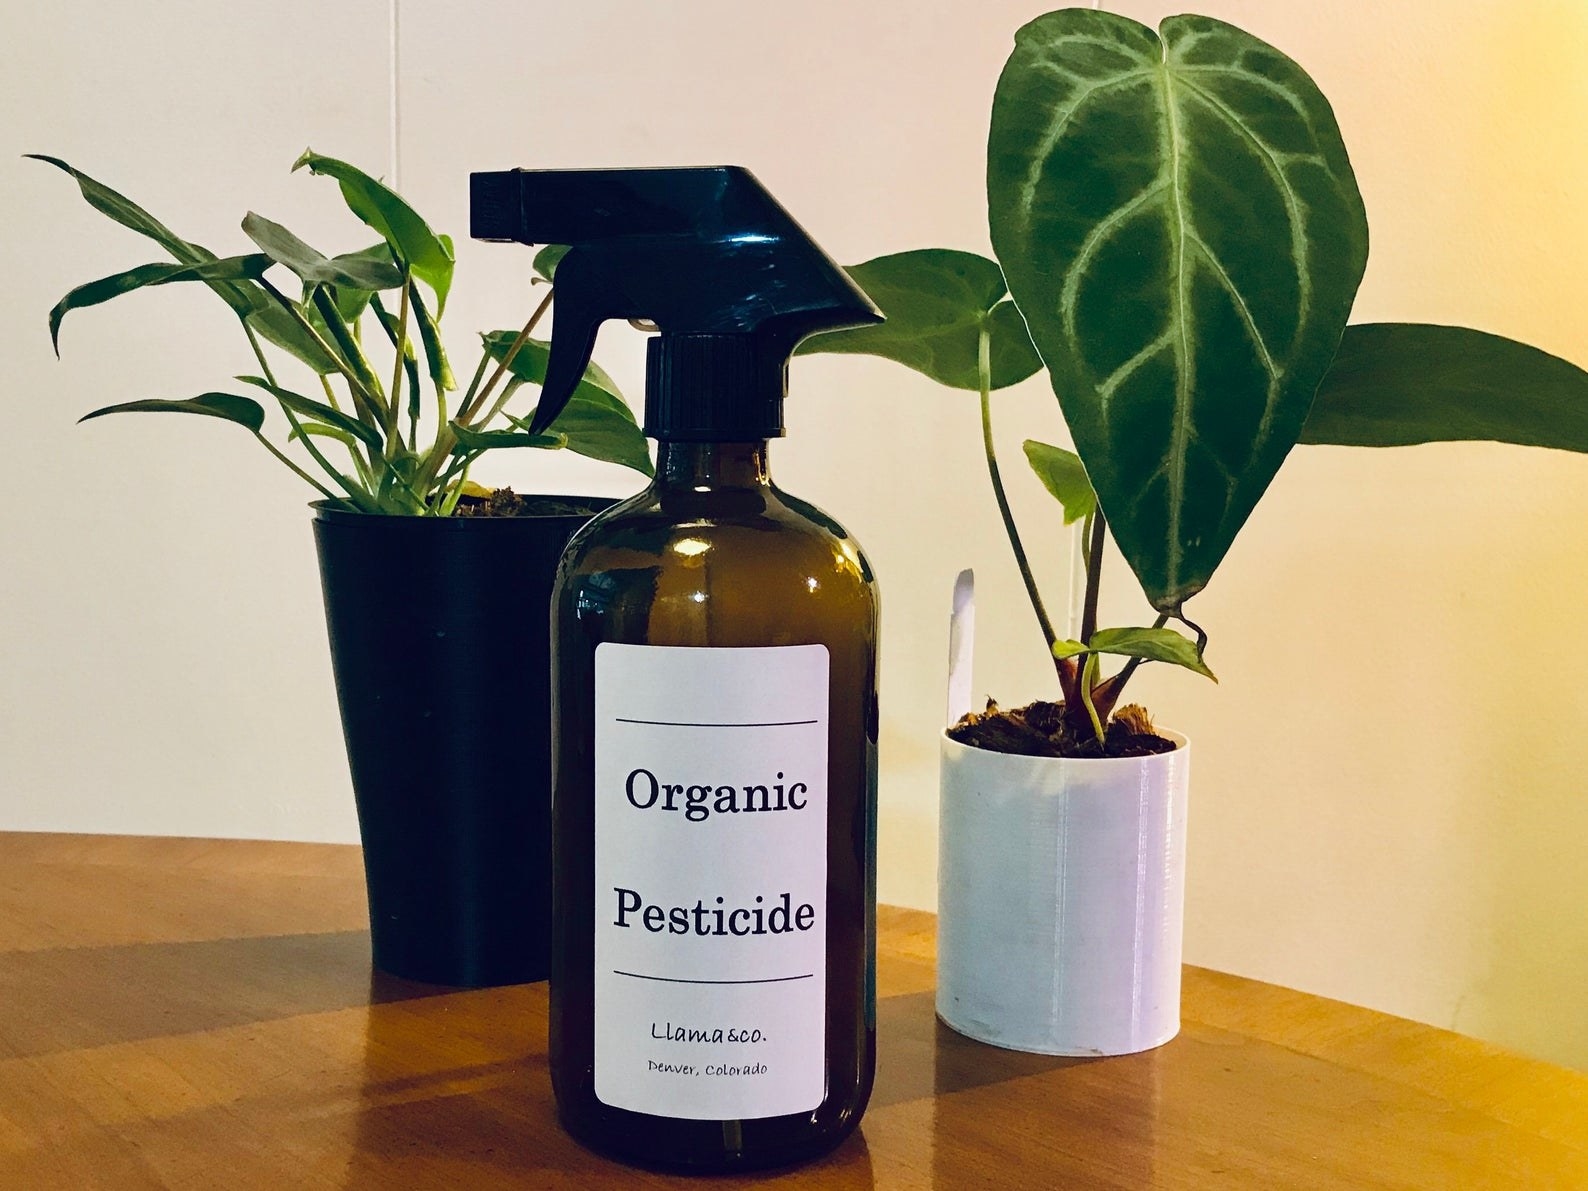 A bottle of the pesticide on a countertop